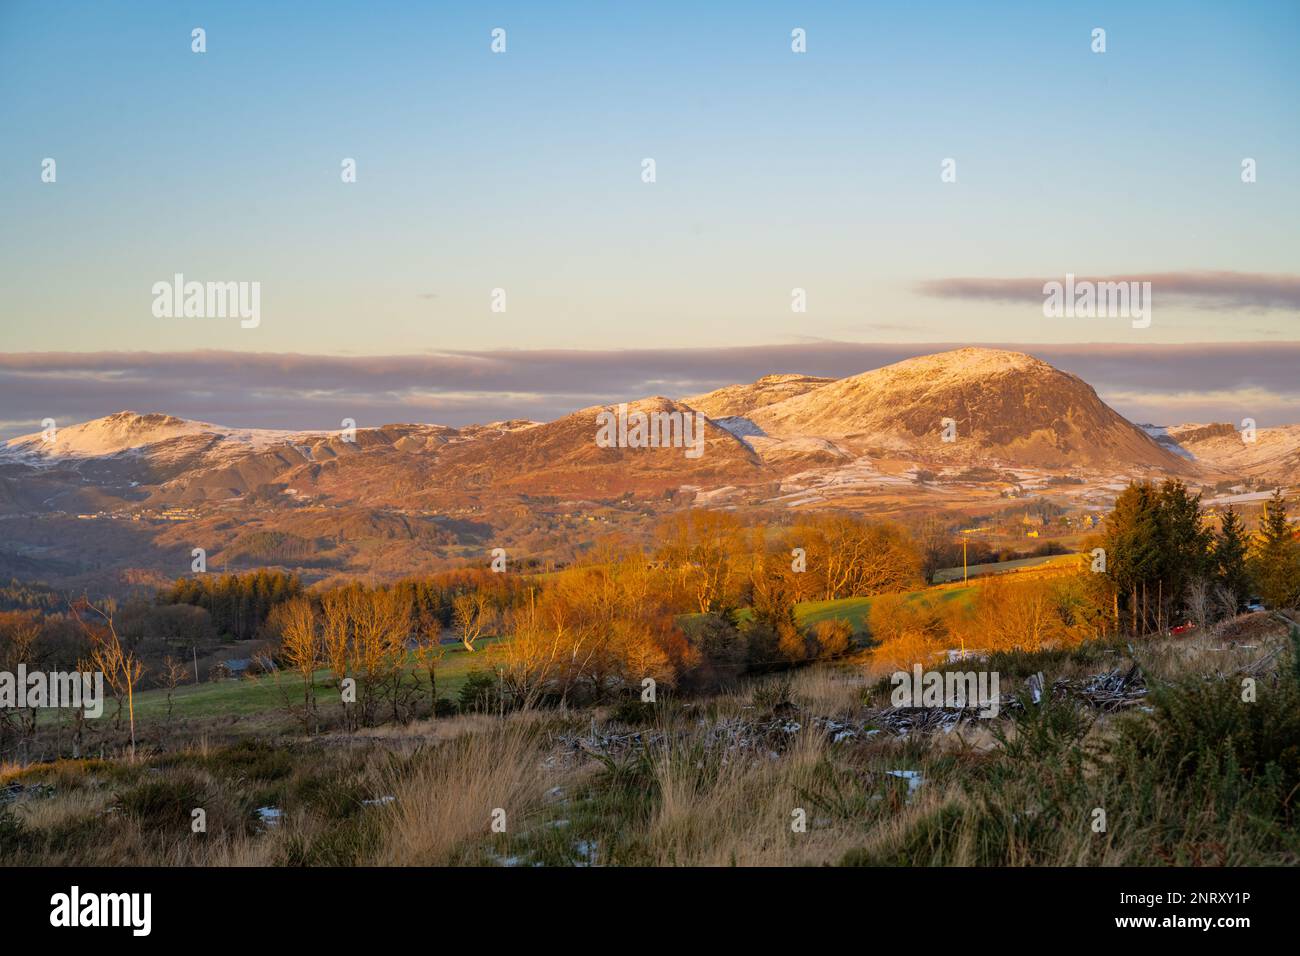 Looking towards the hills of The Vale of Ffestiniog snowdonia from country road near Gellilydan, Blaenau Ffestiniog on a late winter afternoon. Stock Photo